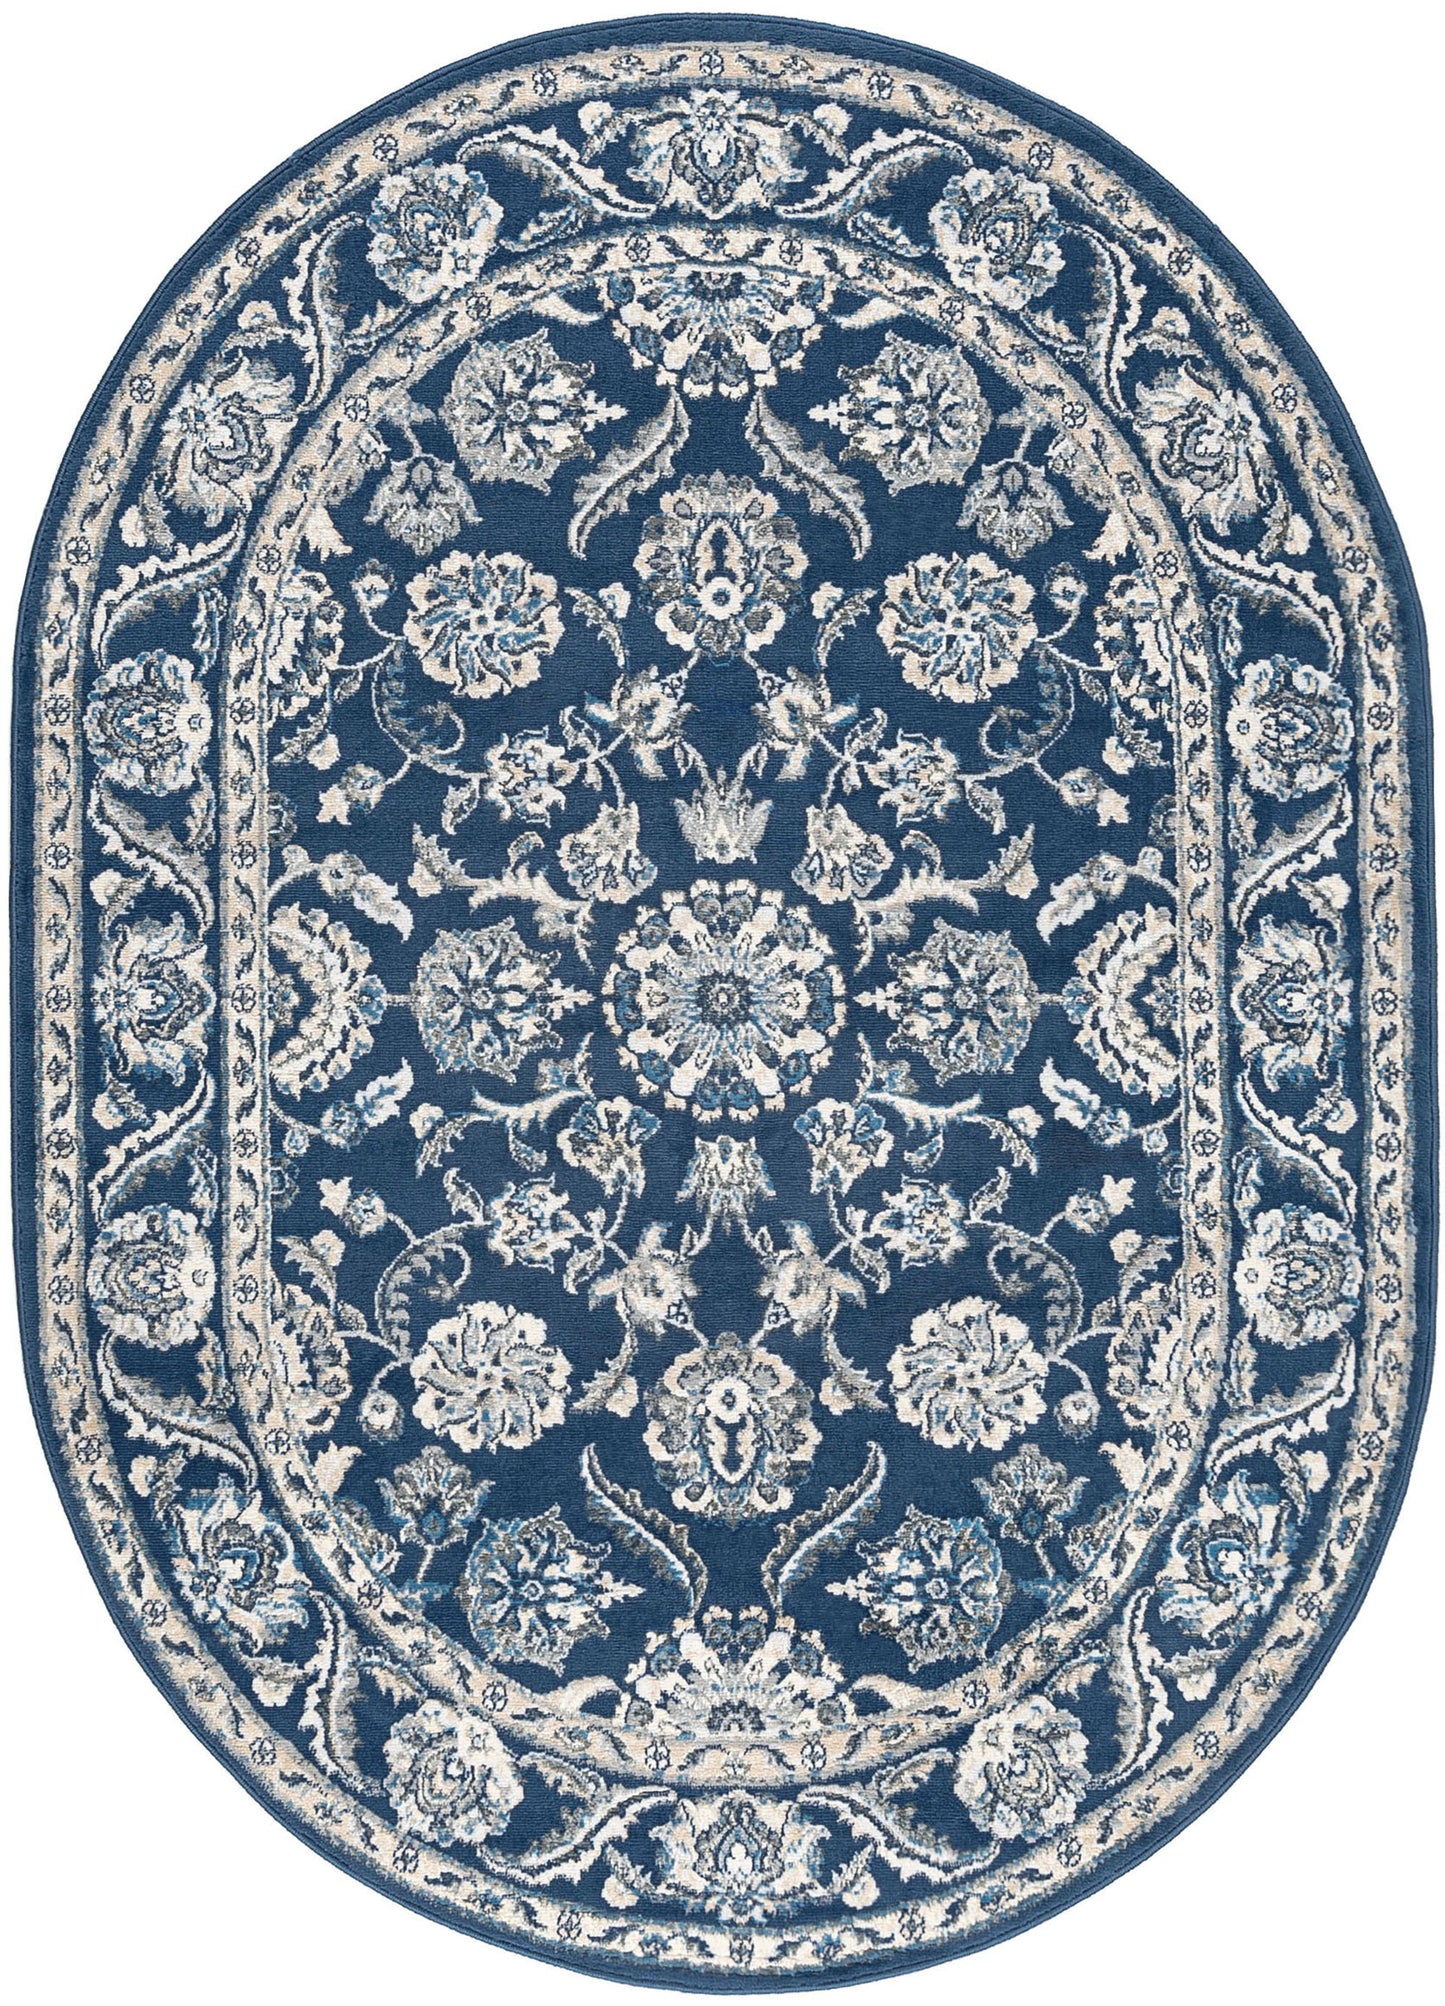 Madison-MDN47 Cut Pile Synthetic Blend Indoor Area Rug by Tayse Rugs